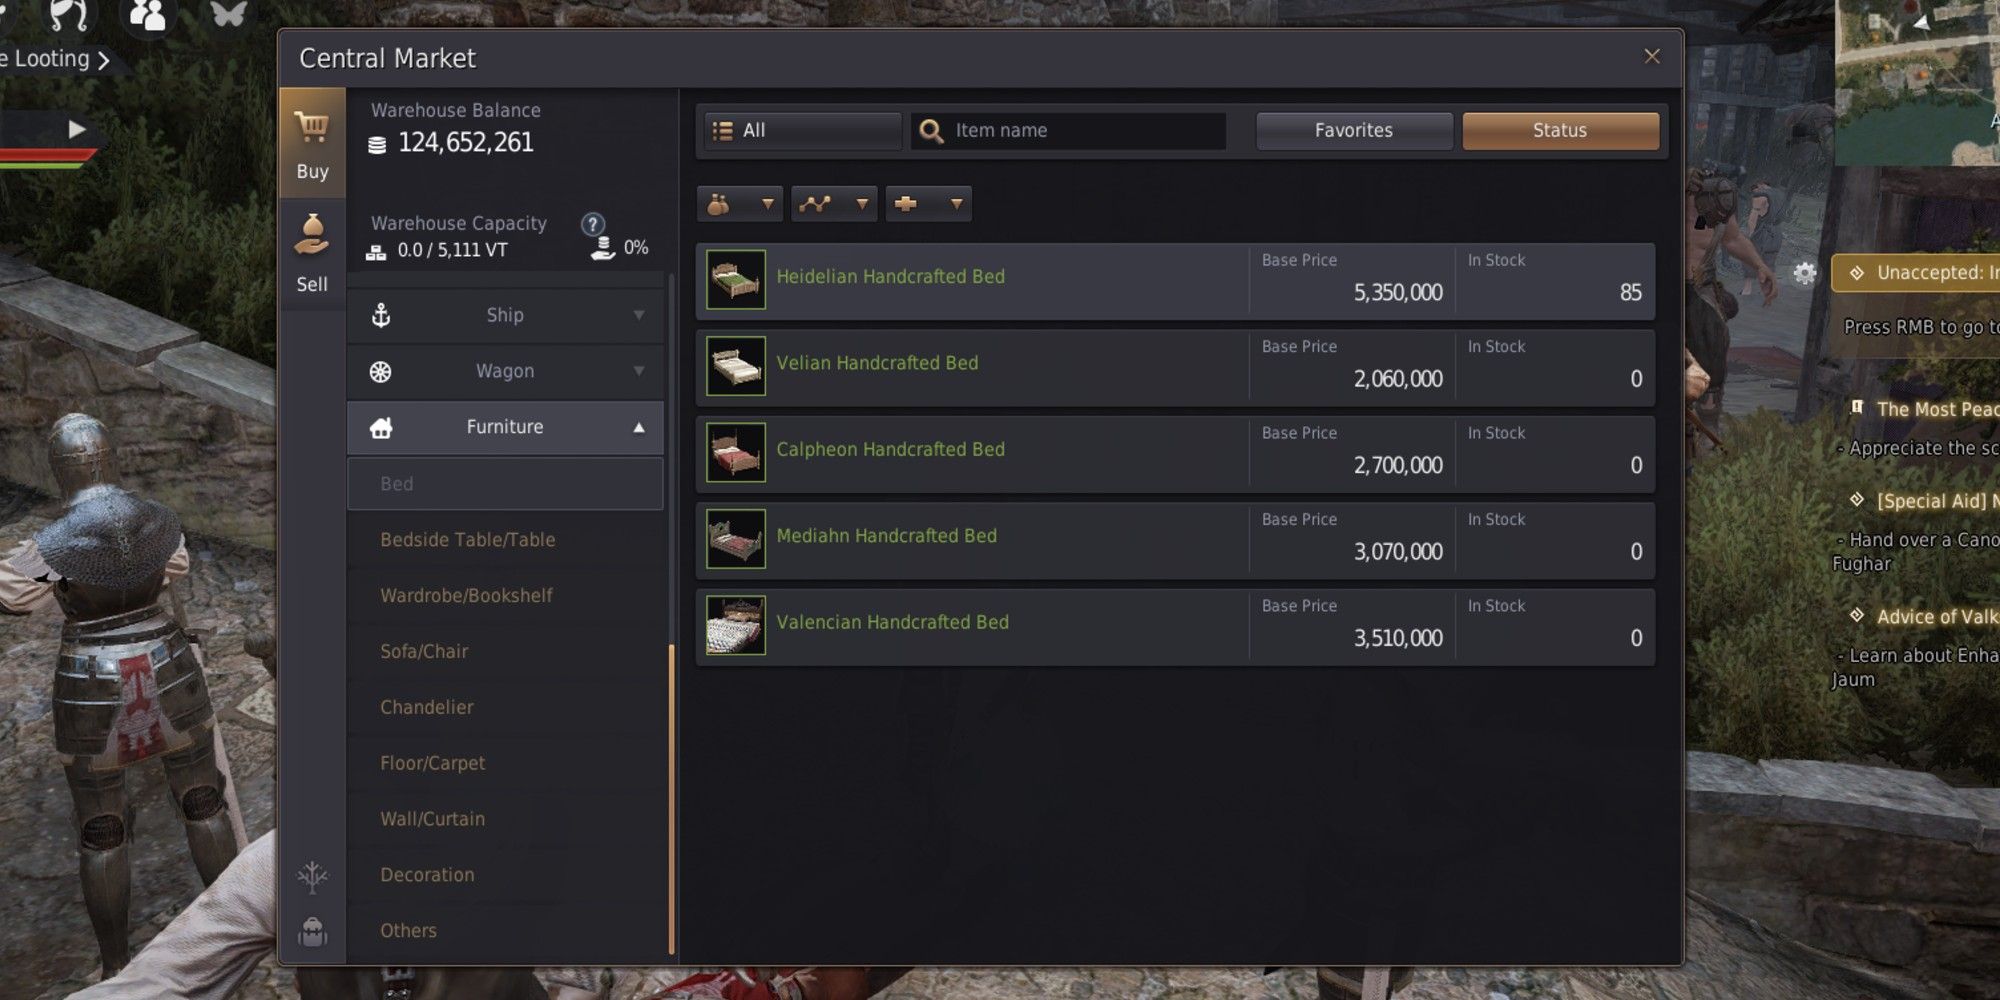 bdo central marketplace current prices